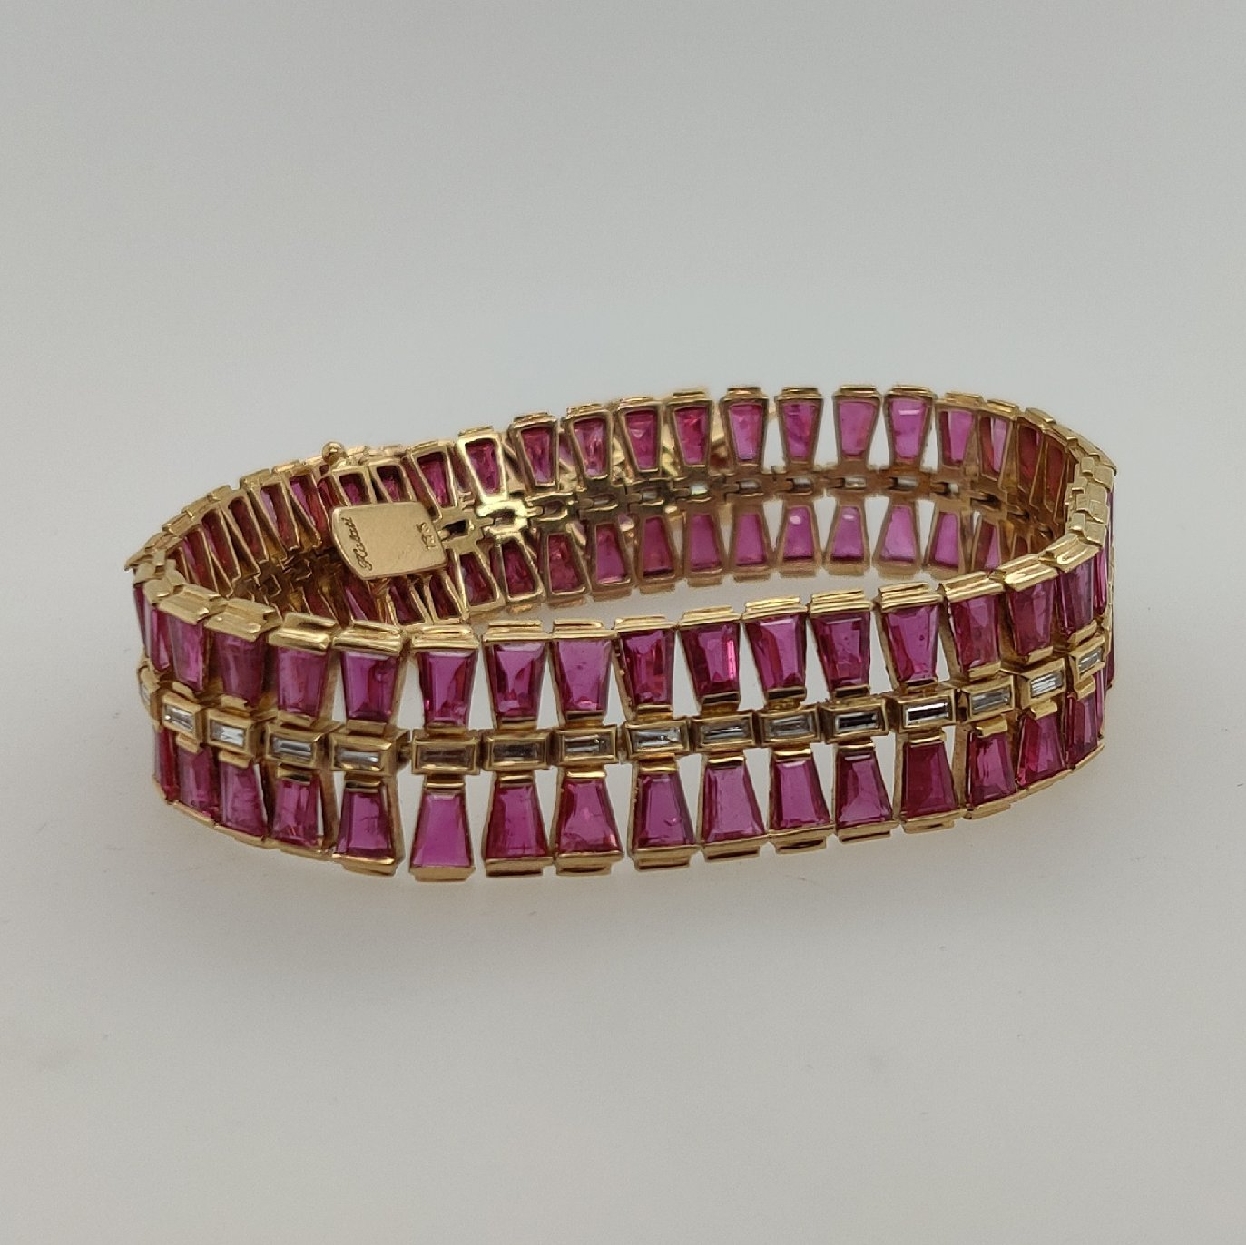 18k Yellow Gold Link Bracelet with 2 Rows of Ruby Baguettes and 1 Row of Diamond Baguettes 7 Inches 16.8 CTTW Rubbies